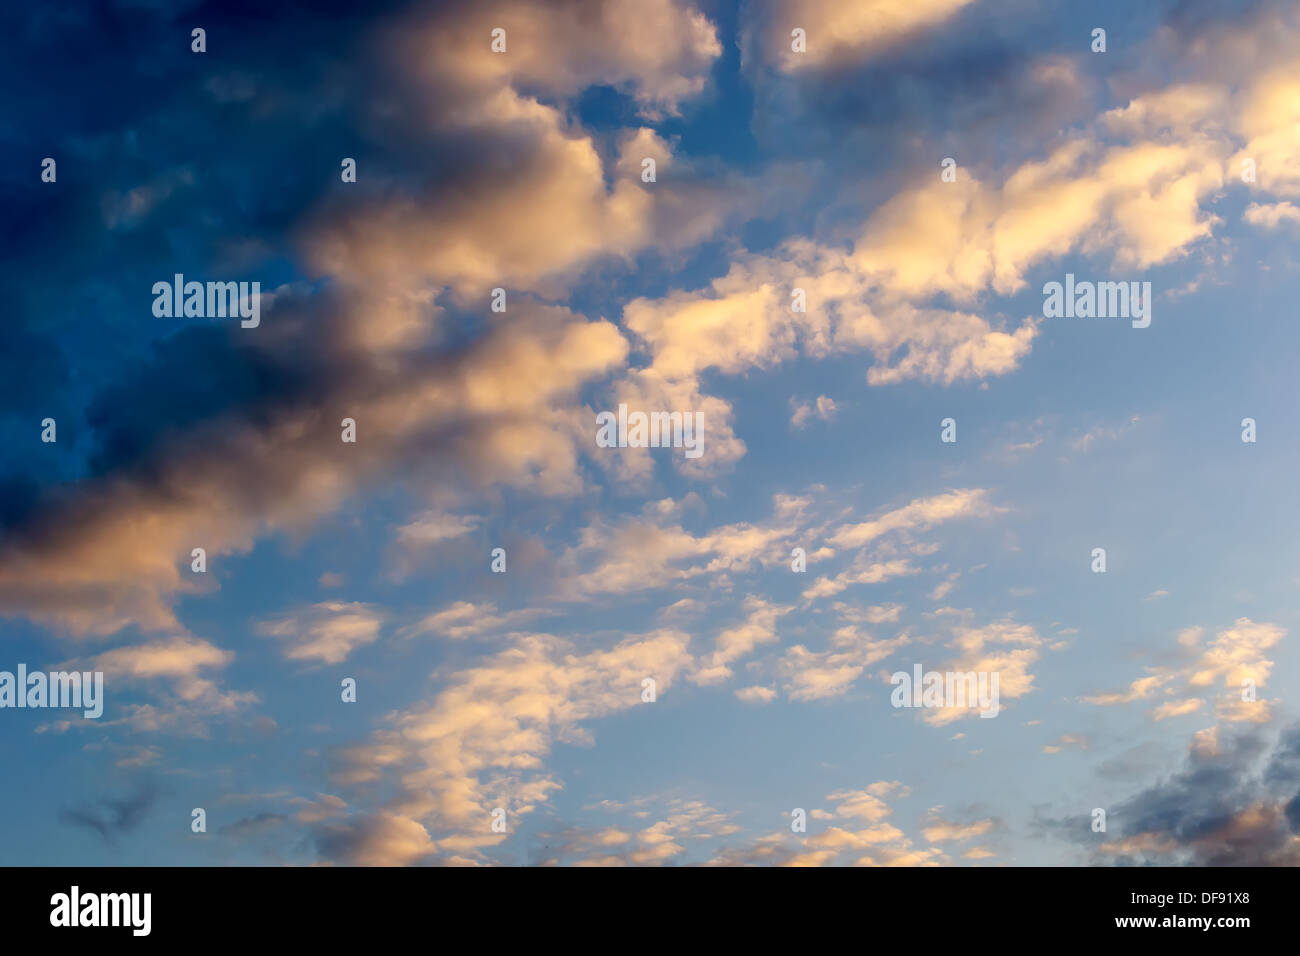 Cloudy sky in the evening sun Stock Photo